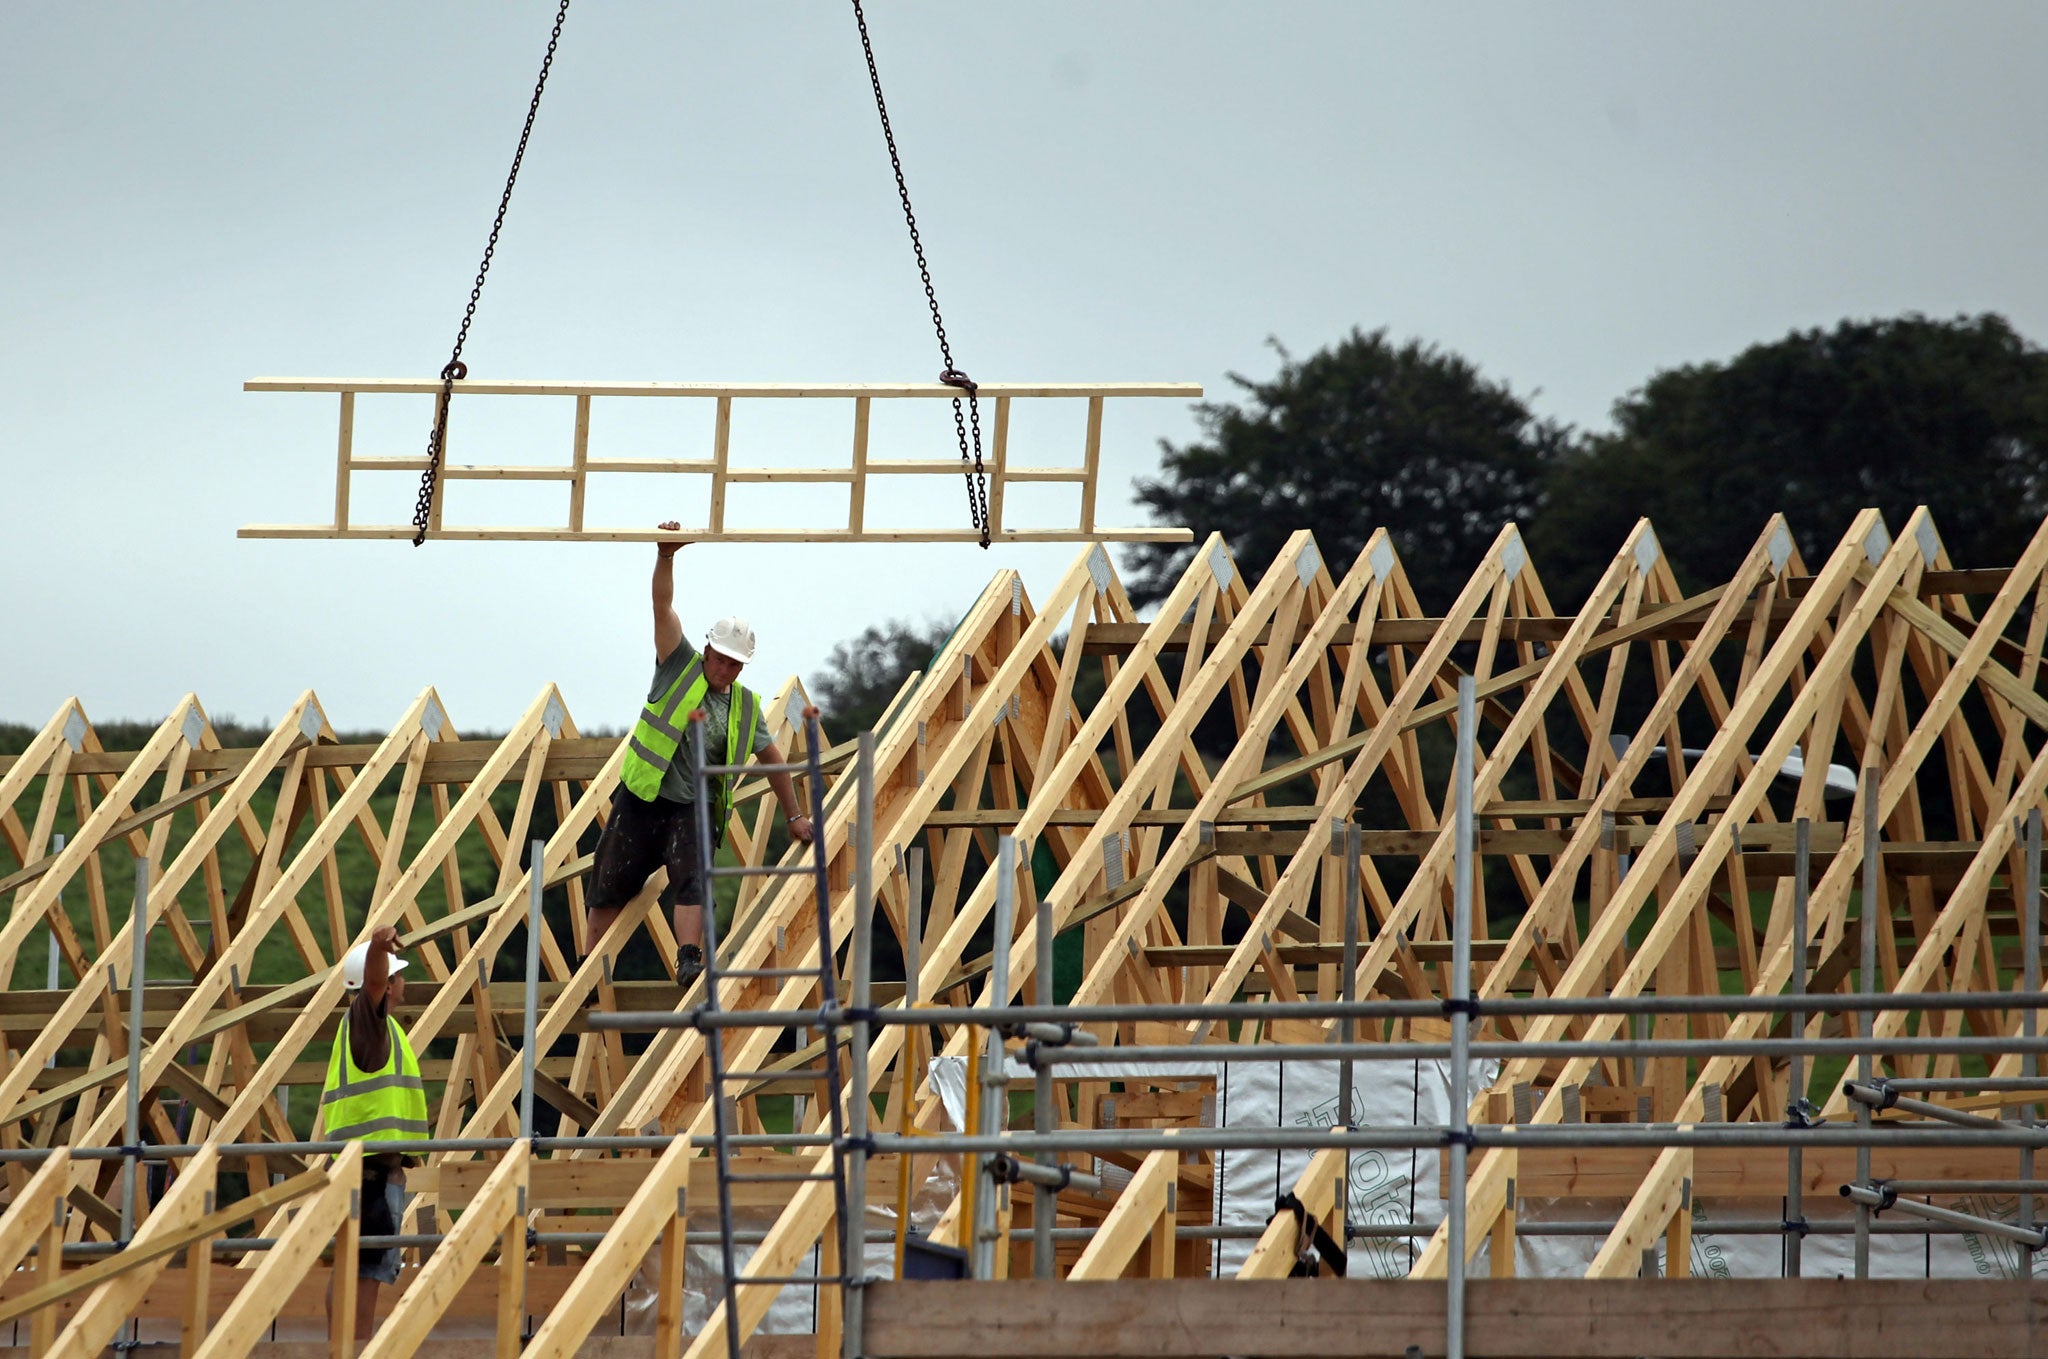 The current rate of construction is at its lowest since the 1920s; indicators suggest the best way out of the housing crisis is to build - and keep building